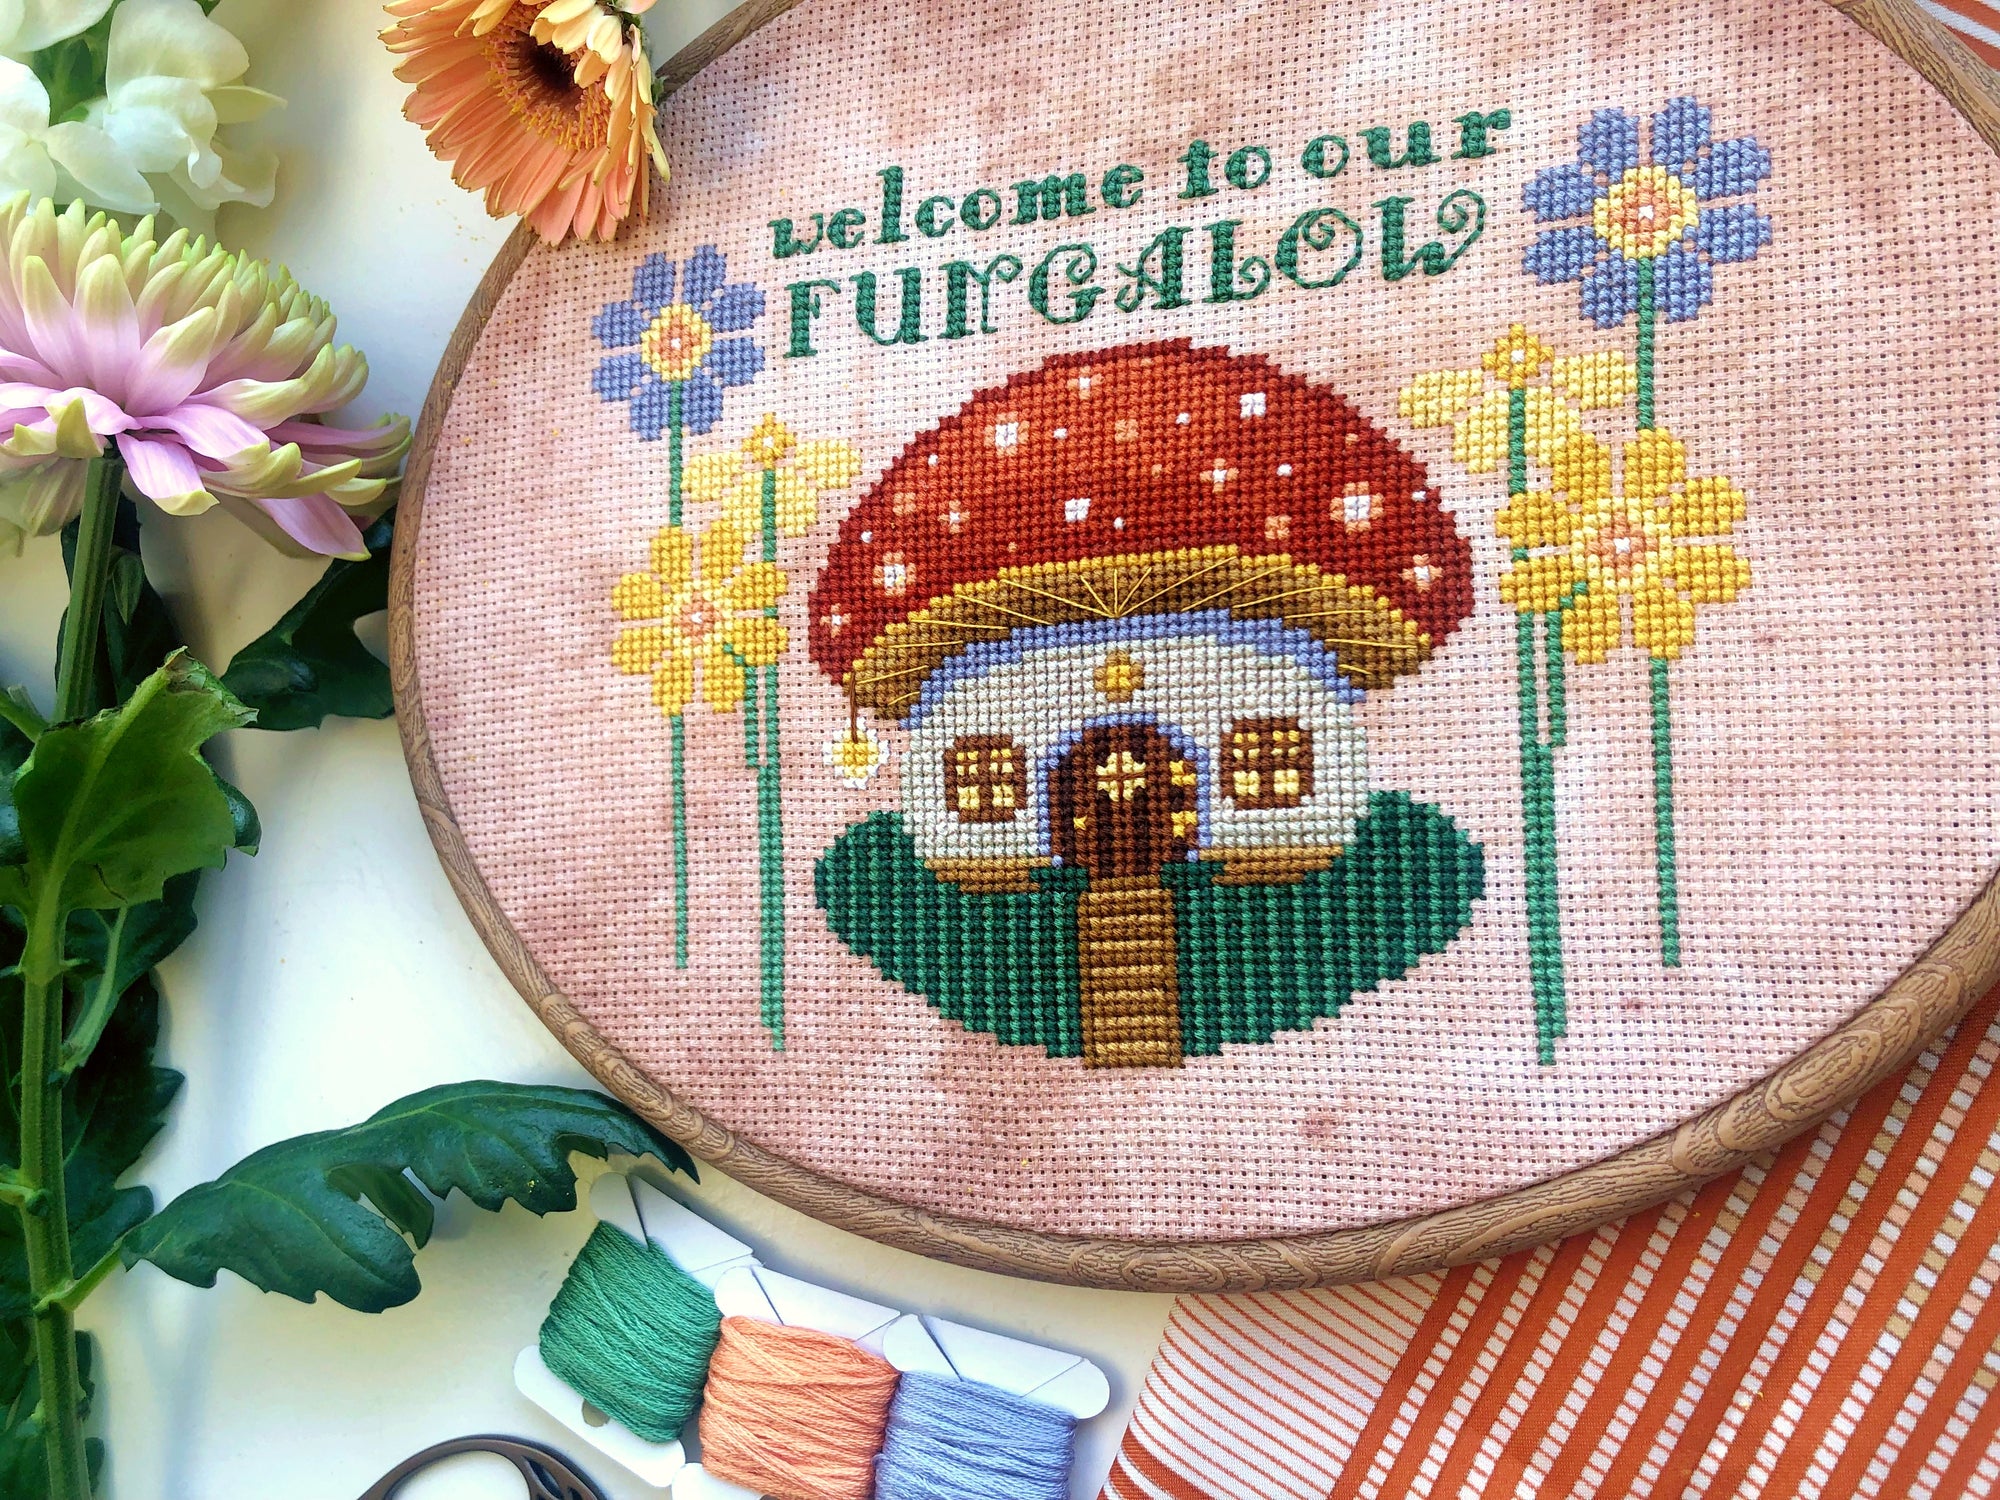 Closer view of toadstool mushroom house cross stitch pattern. House is framed on either side by yellow and lilac flowers. The house has a little round door and several windows. In front is a path, surrounded by green grass. There is a lantern.